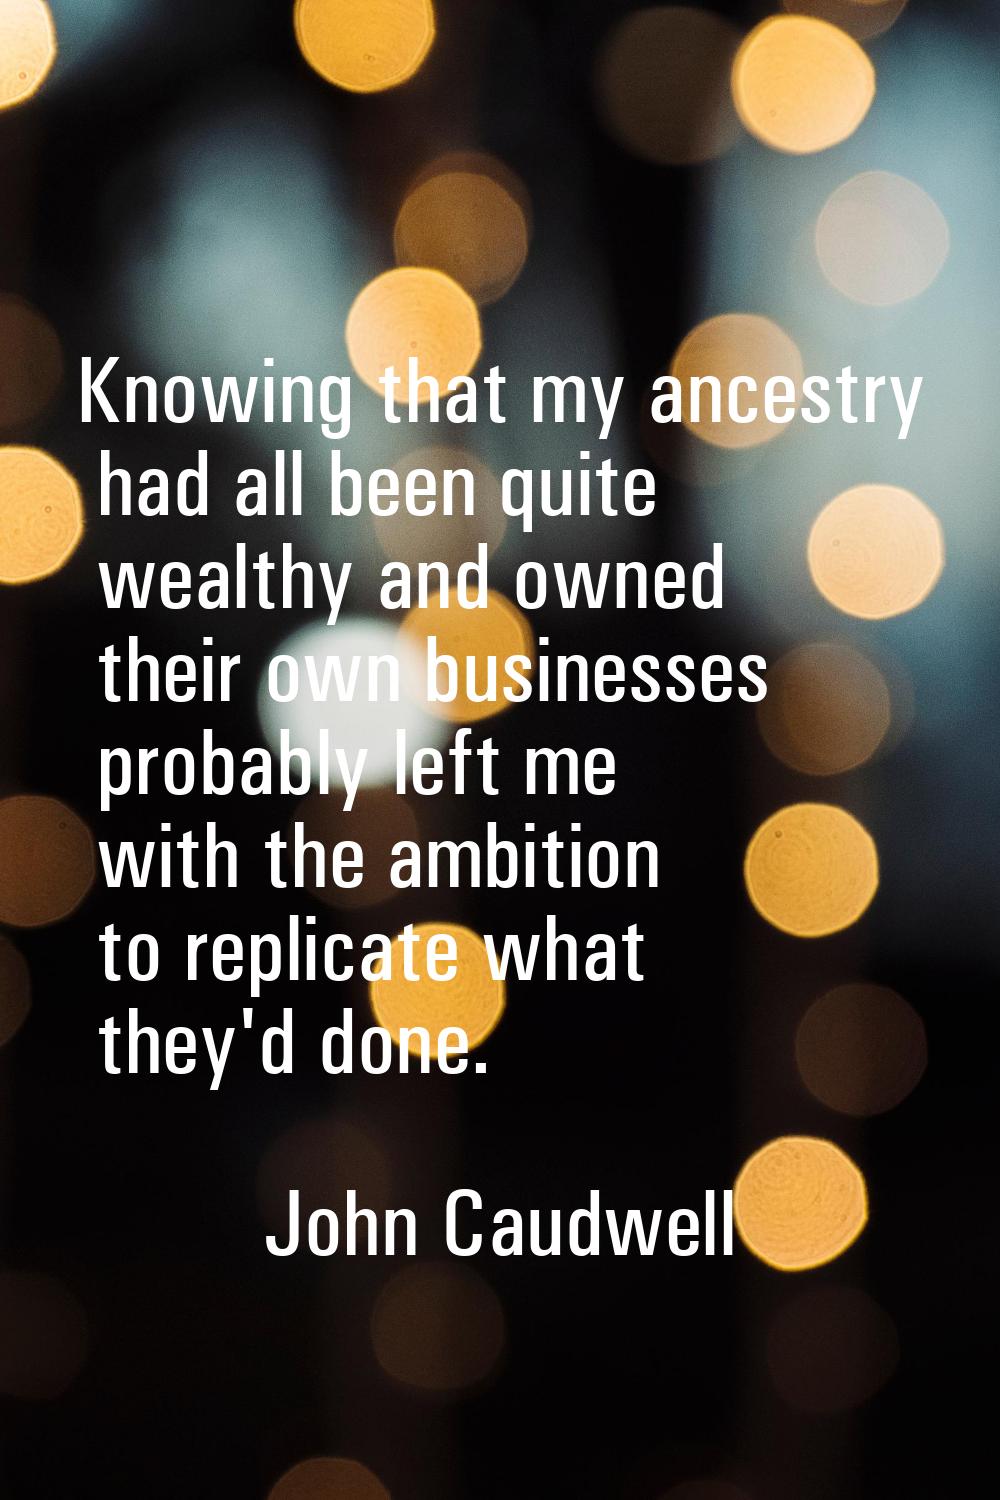 Knowing that my ancestry had all been quite wealthy and owned their own businesses probably left me